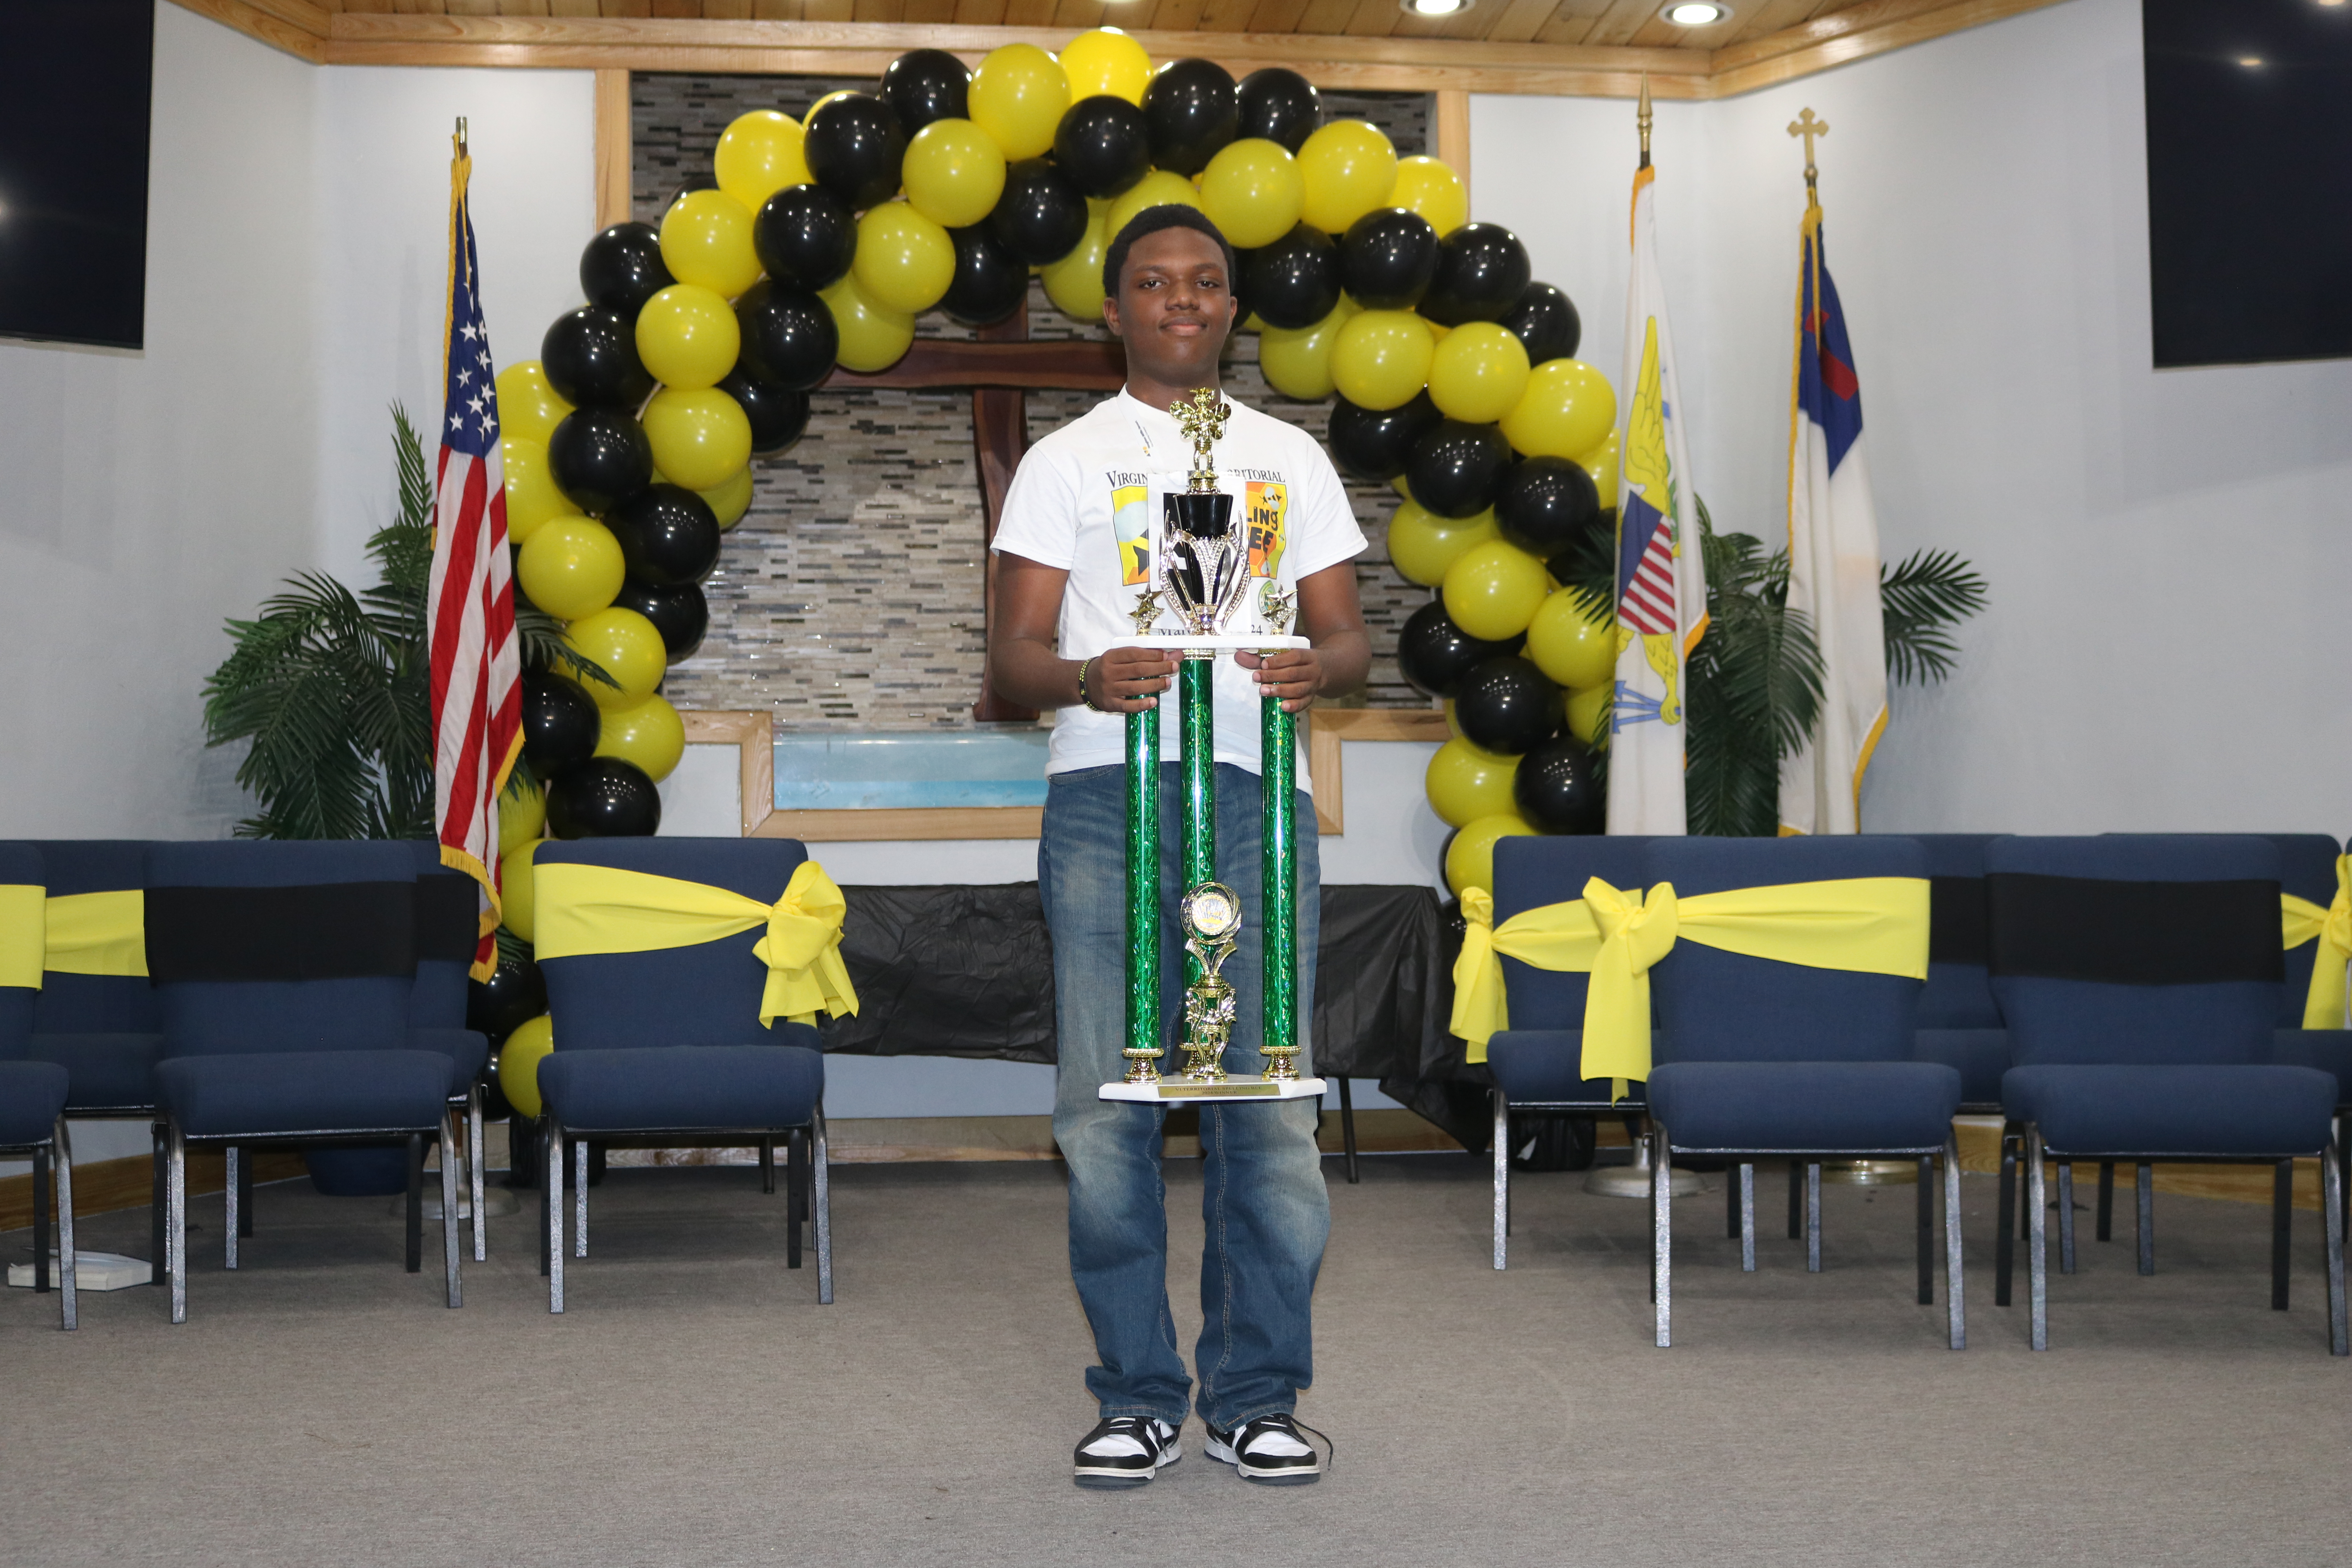 Virgin Islands Department of Education Congratulates Winners of the 51st Annual Territorial Spelling Bee